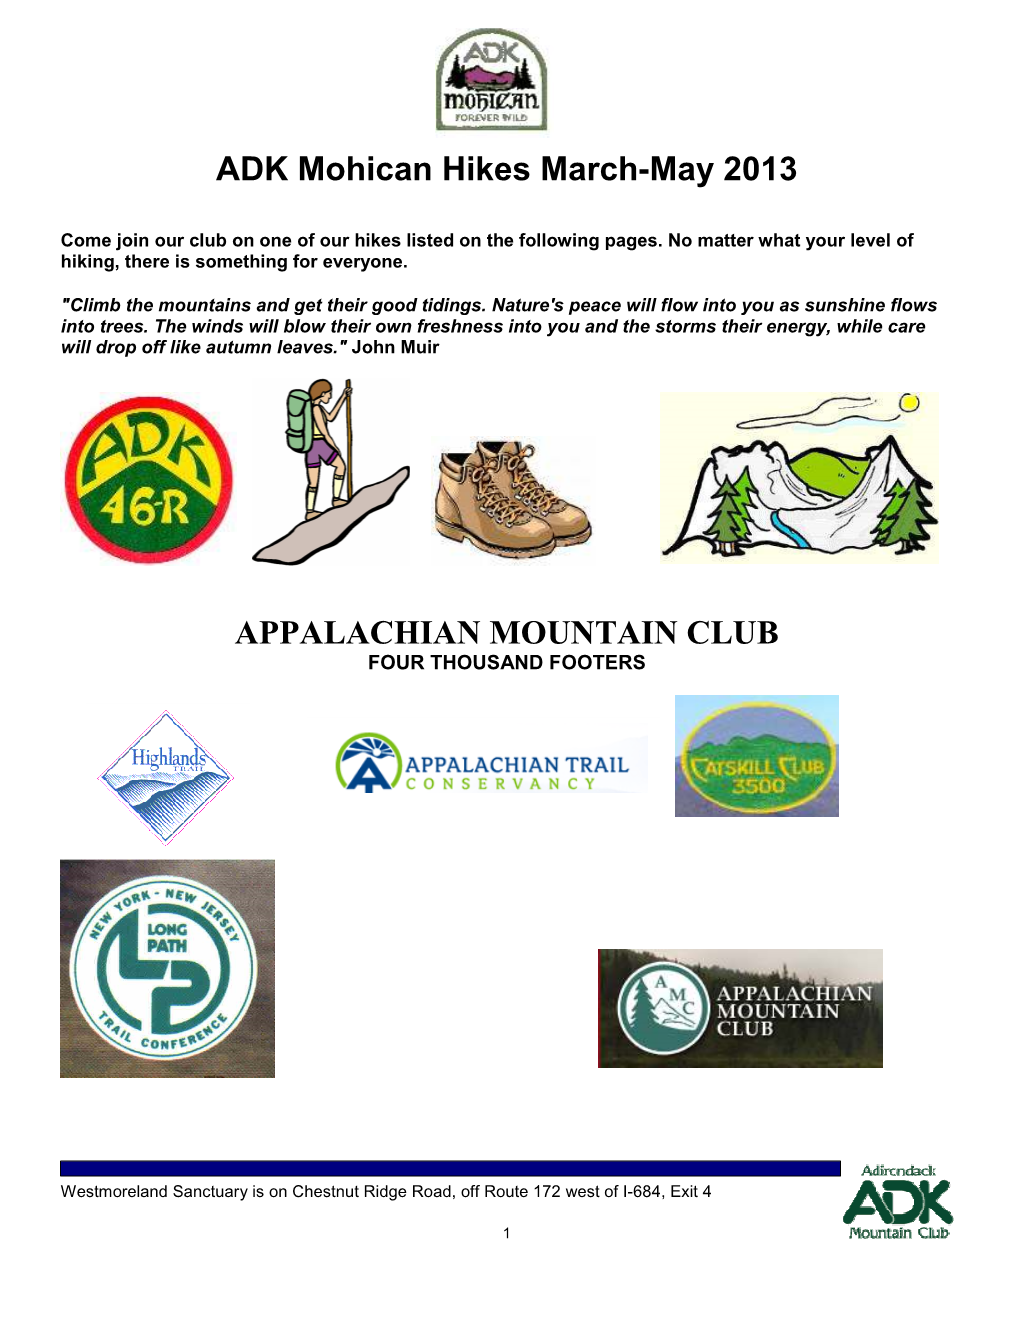 ADK Mohican Hikes March-May 2013 APPALACHIA MOU TAI CLUB